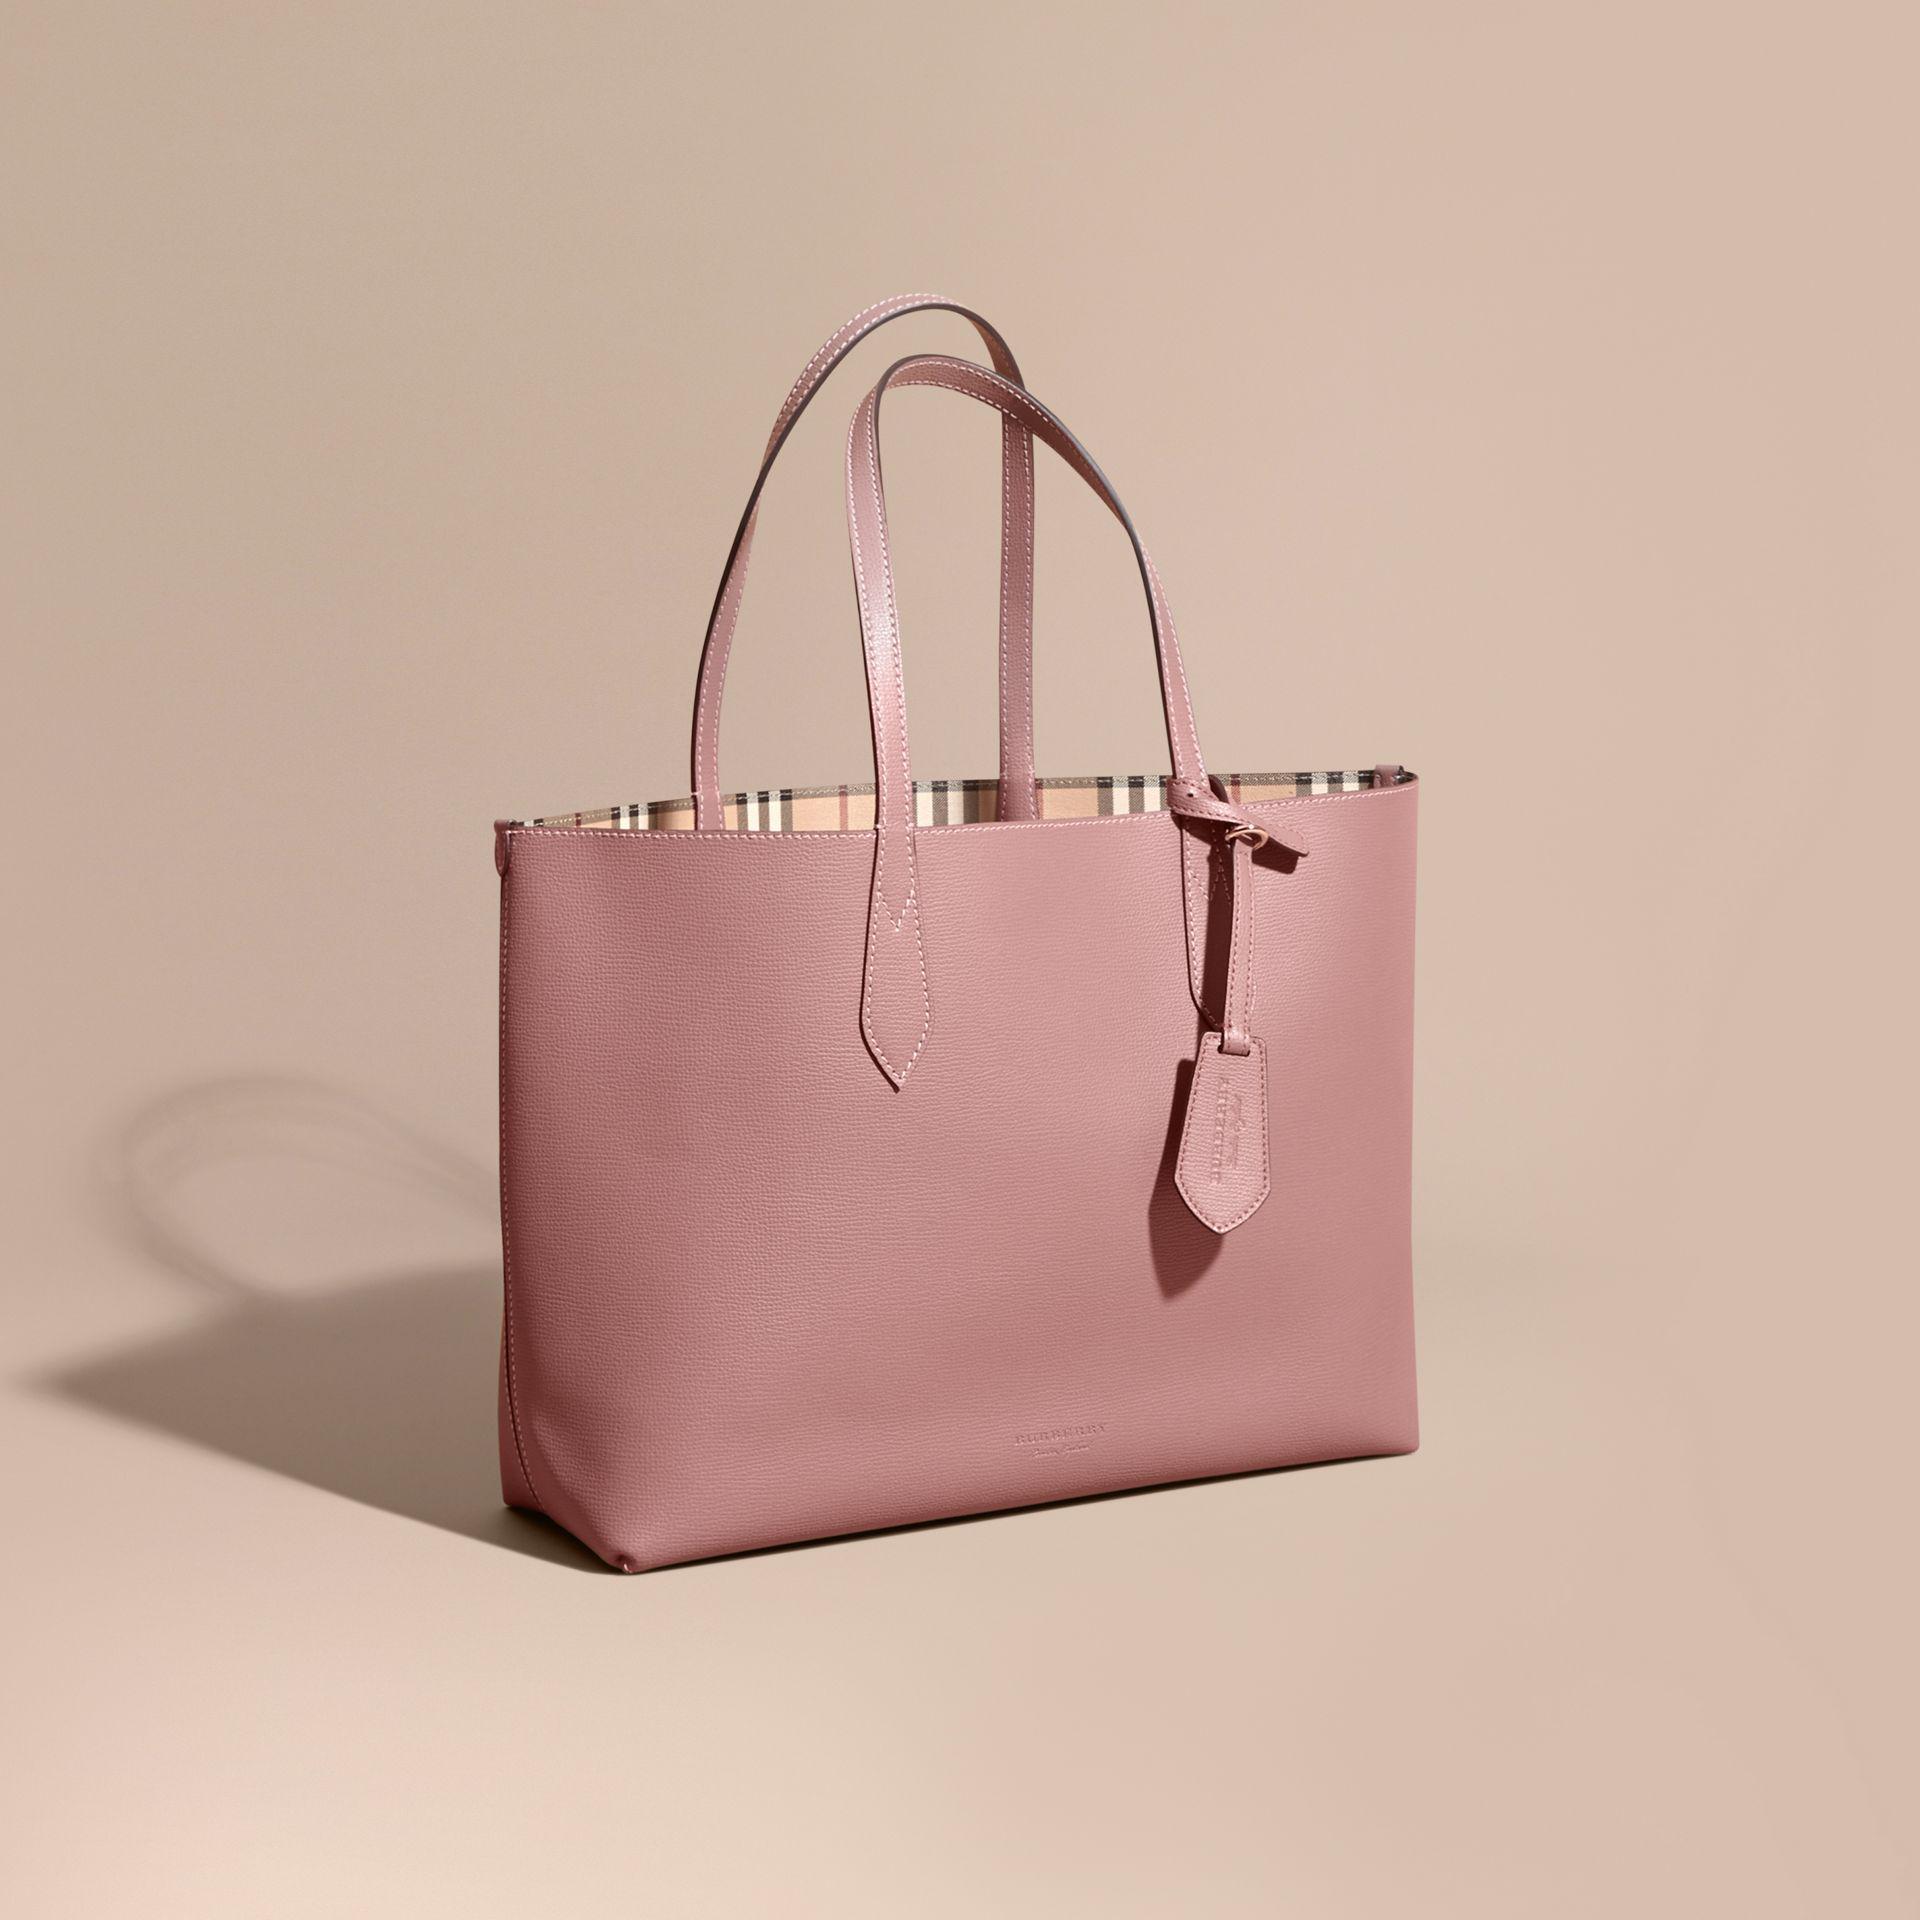 Burberry The Medium Reversible Tote In Haymarket Check And Leather Light  Elderberry - Lyst